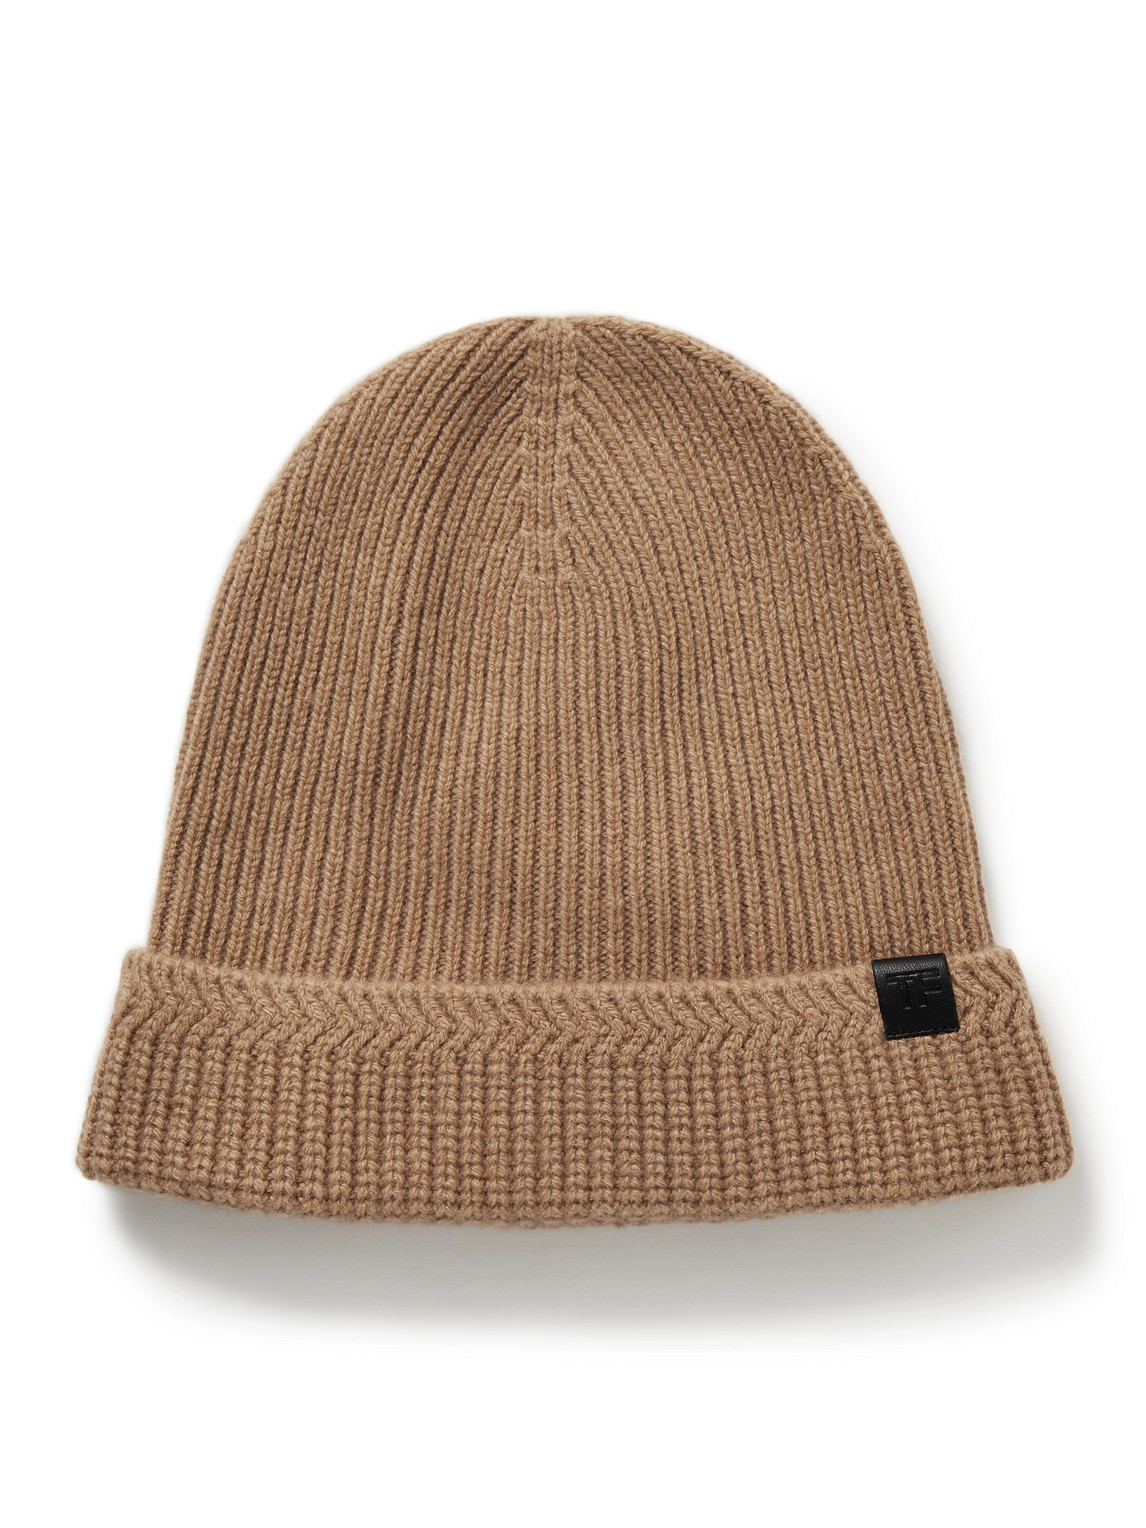 TOM FORD - Leather-Trimmed Ribbed Wool and Cashmere-Blend Beanie - Men - Neutrals - M von TOM FORD